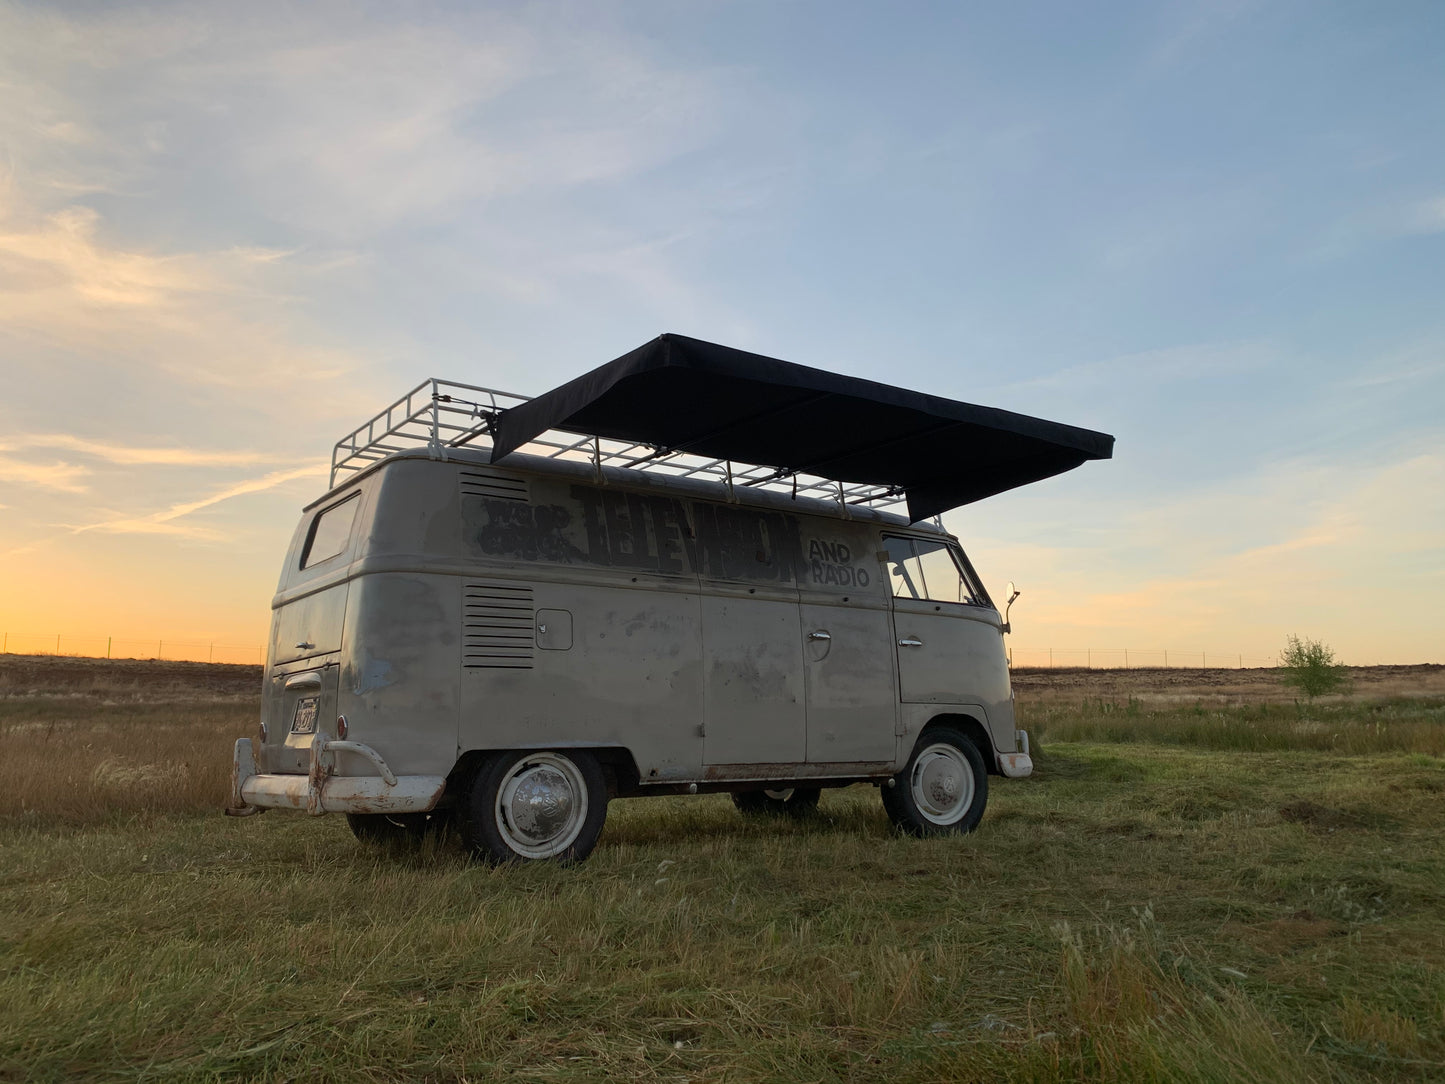 VW Bus Wing: Sir-Shade™ Telescoping Awning System